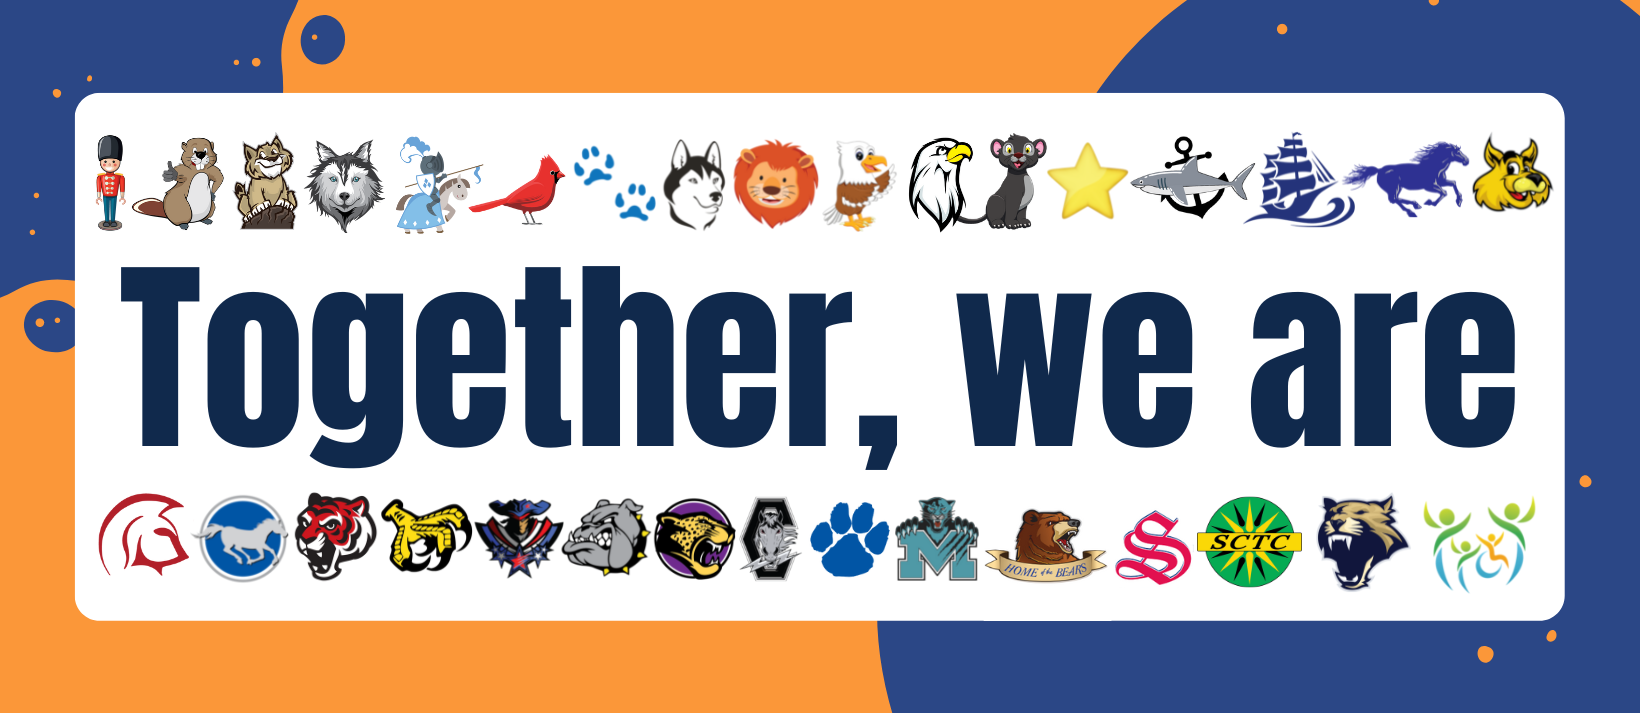 orange and blue background with the text "Together, We Are" surrounded by the logos for each school and center